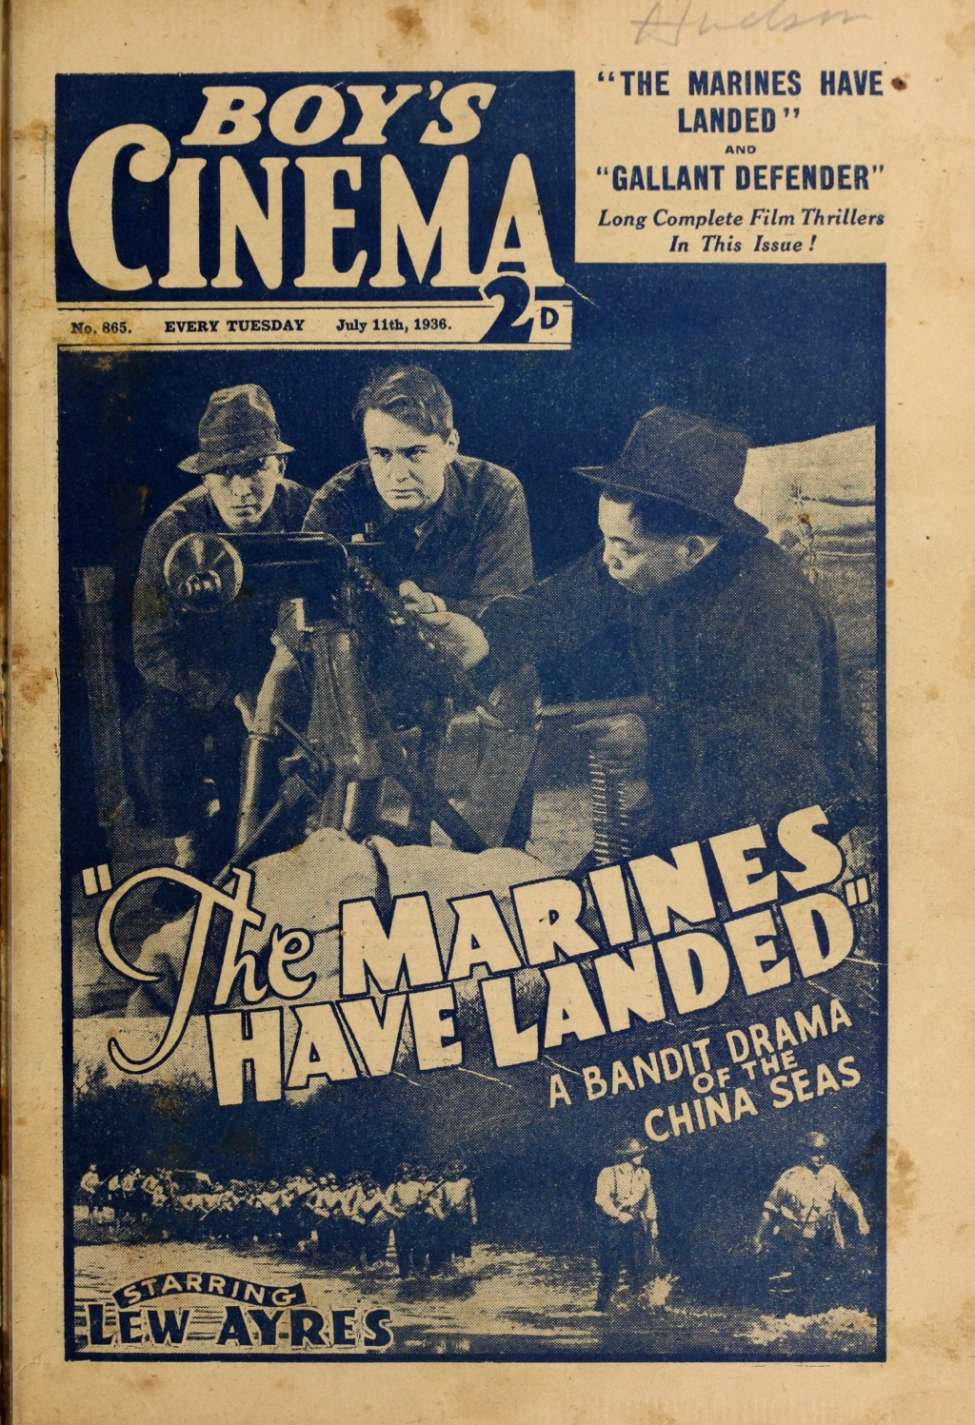 Comic Book Cover For Boy's Cinema 865 - The Marines Have Landed - Lew Ayres